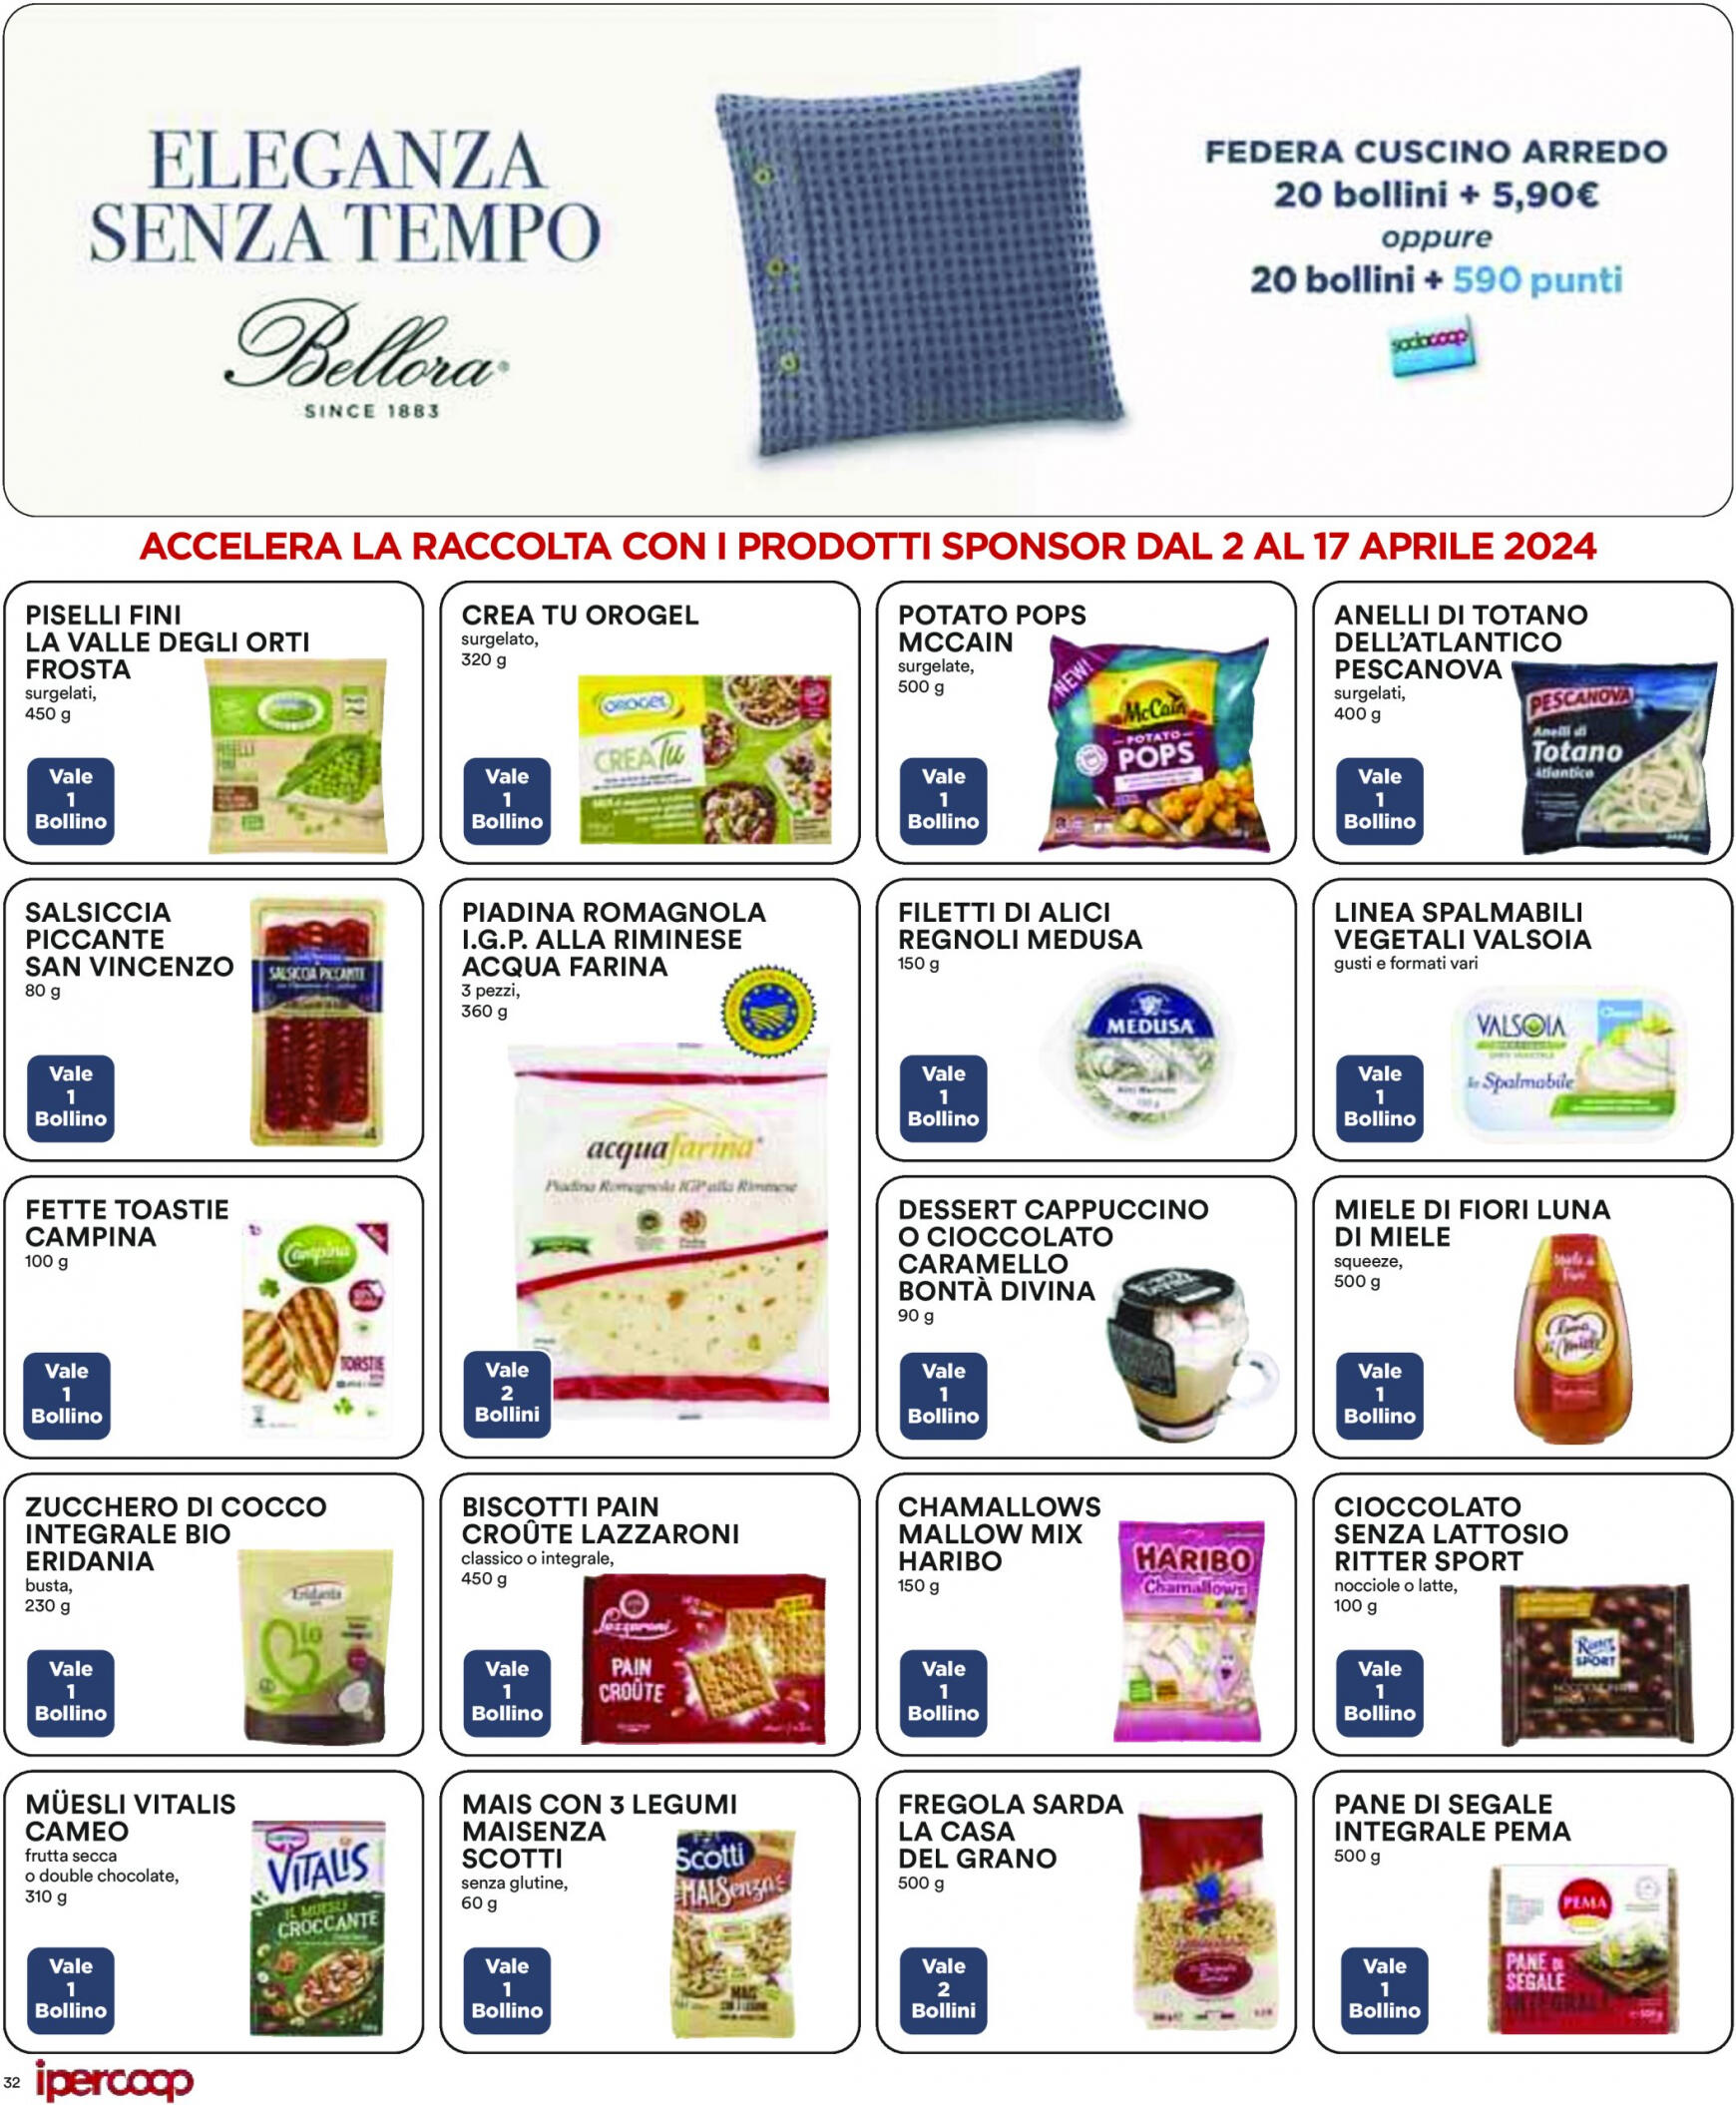 coop - Nuovo volantino Coop 02.04. - 17.04. - page: 32